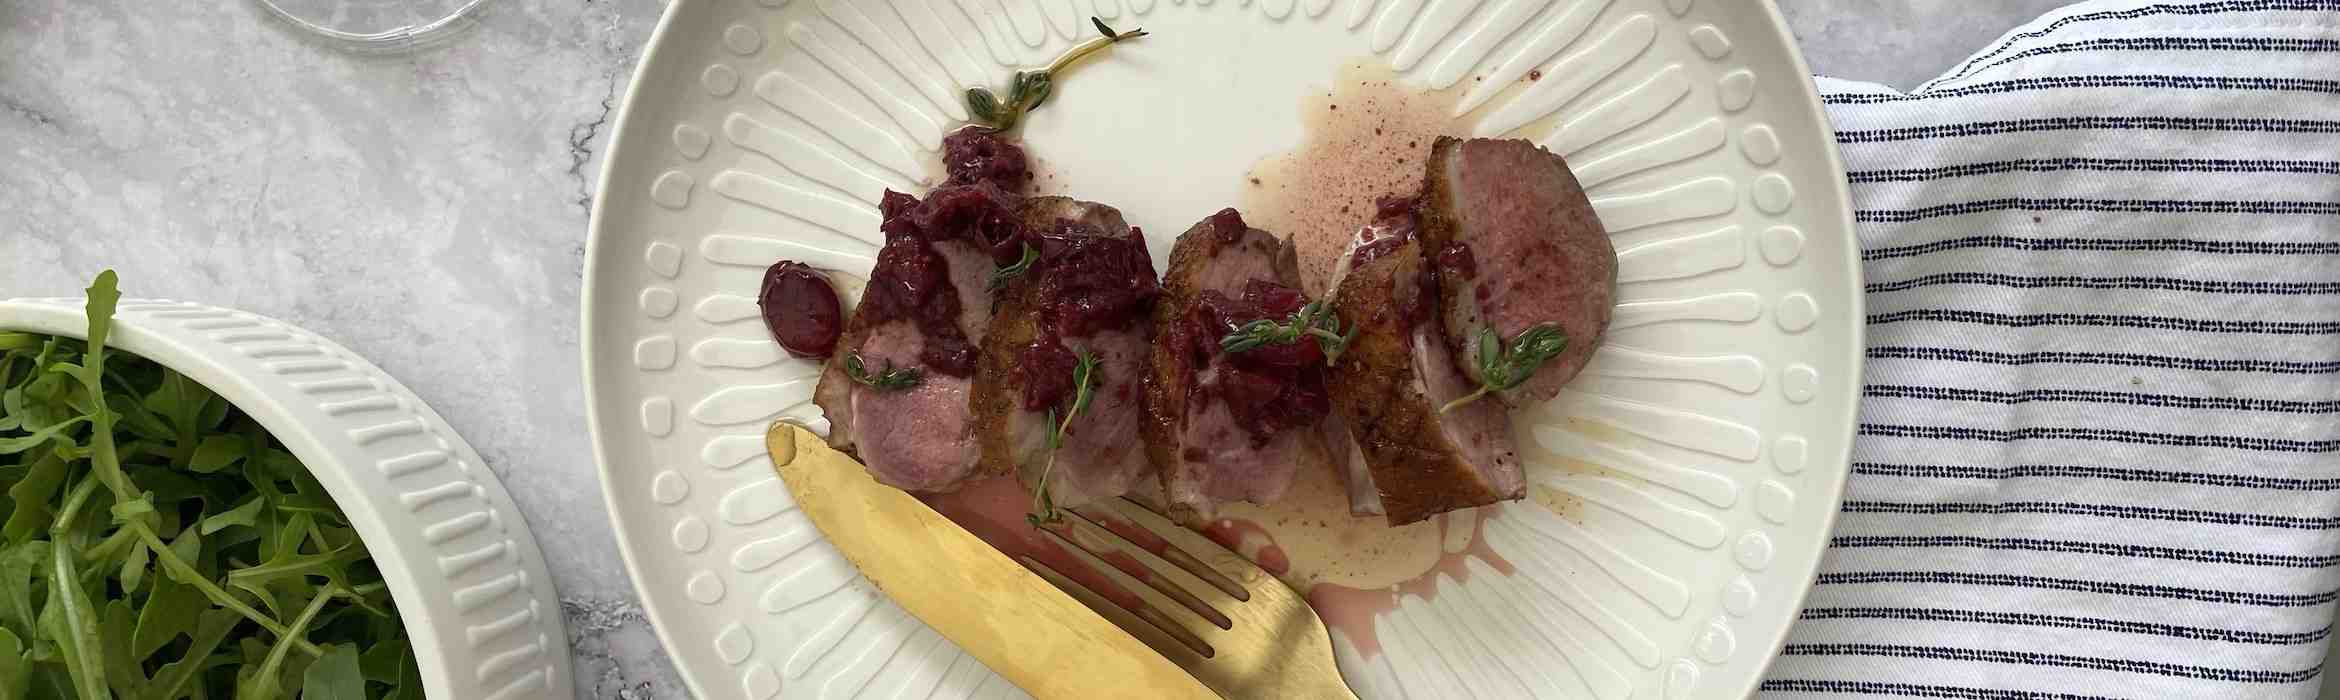 Pan-seared Duck Breasts with red wine, thyme and cranberry reduction Recipe